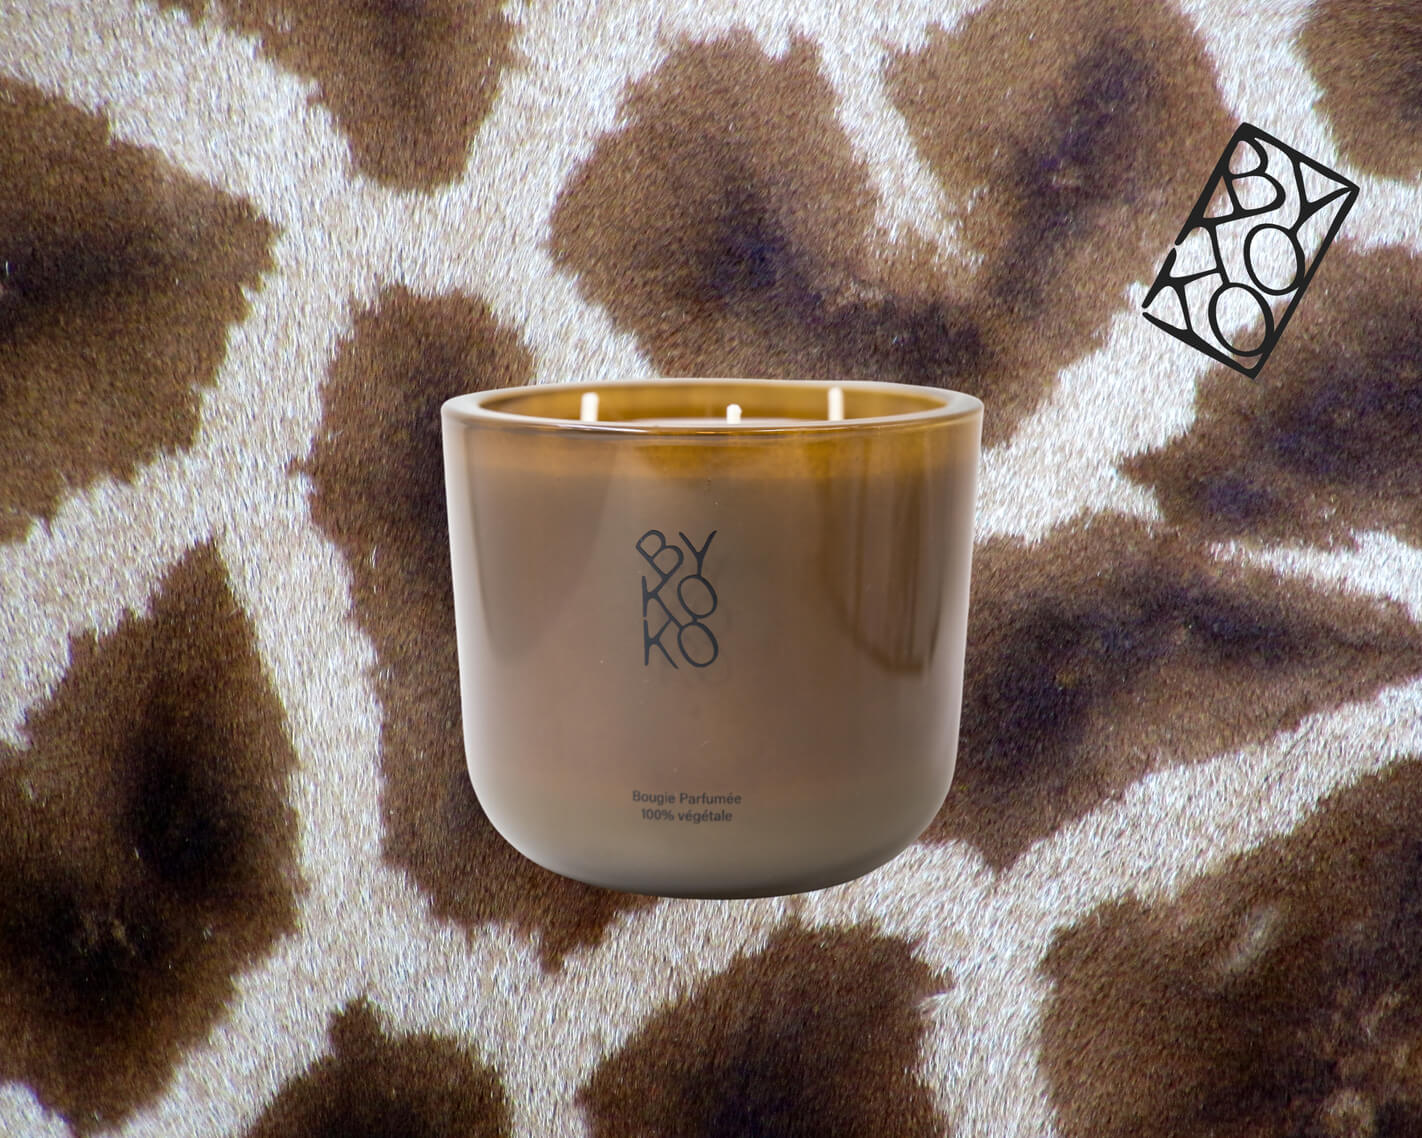 BYKOKO - HAVANA LOVERS candle in elegant taupe glass container, crafted in Geneva, exuding a captivating fragrance of amber, vanilla & zesty orange